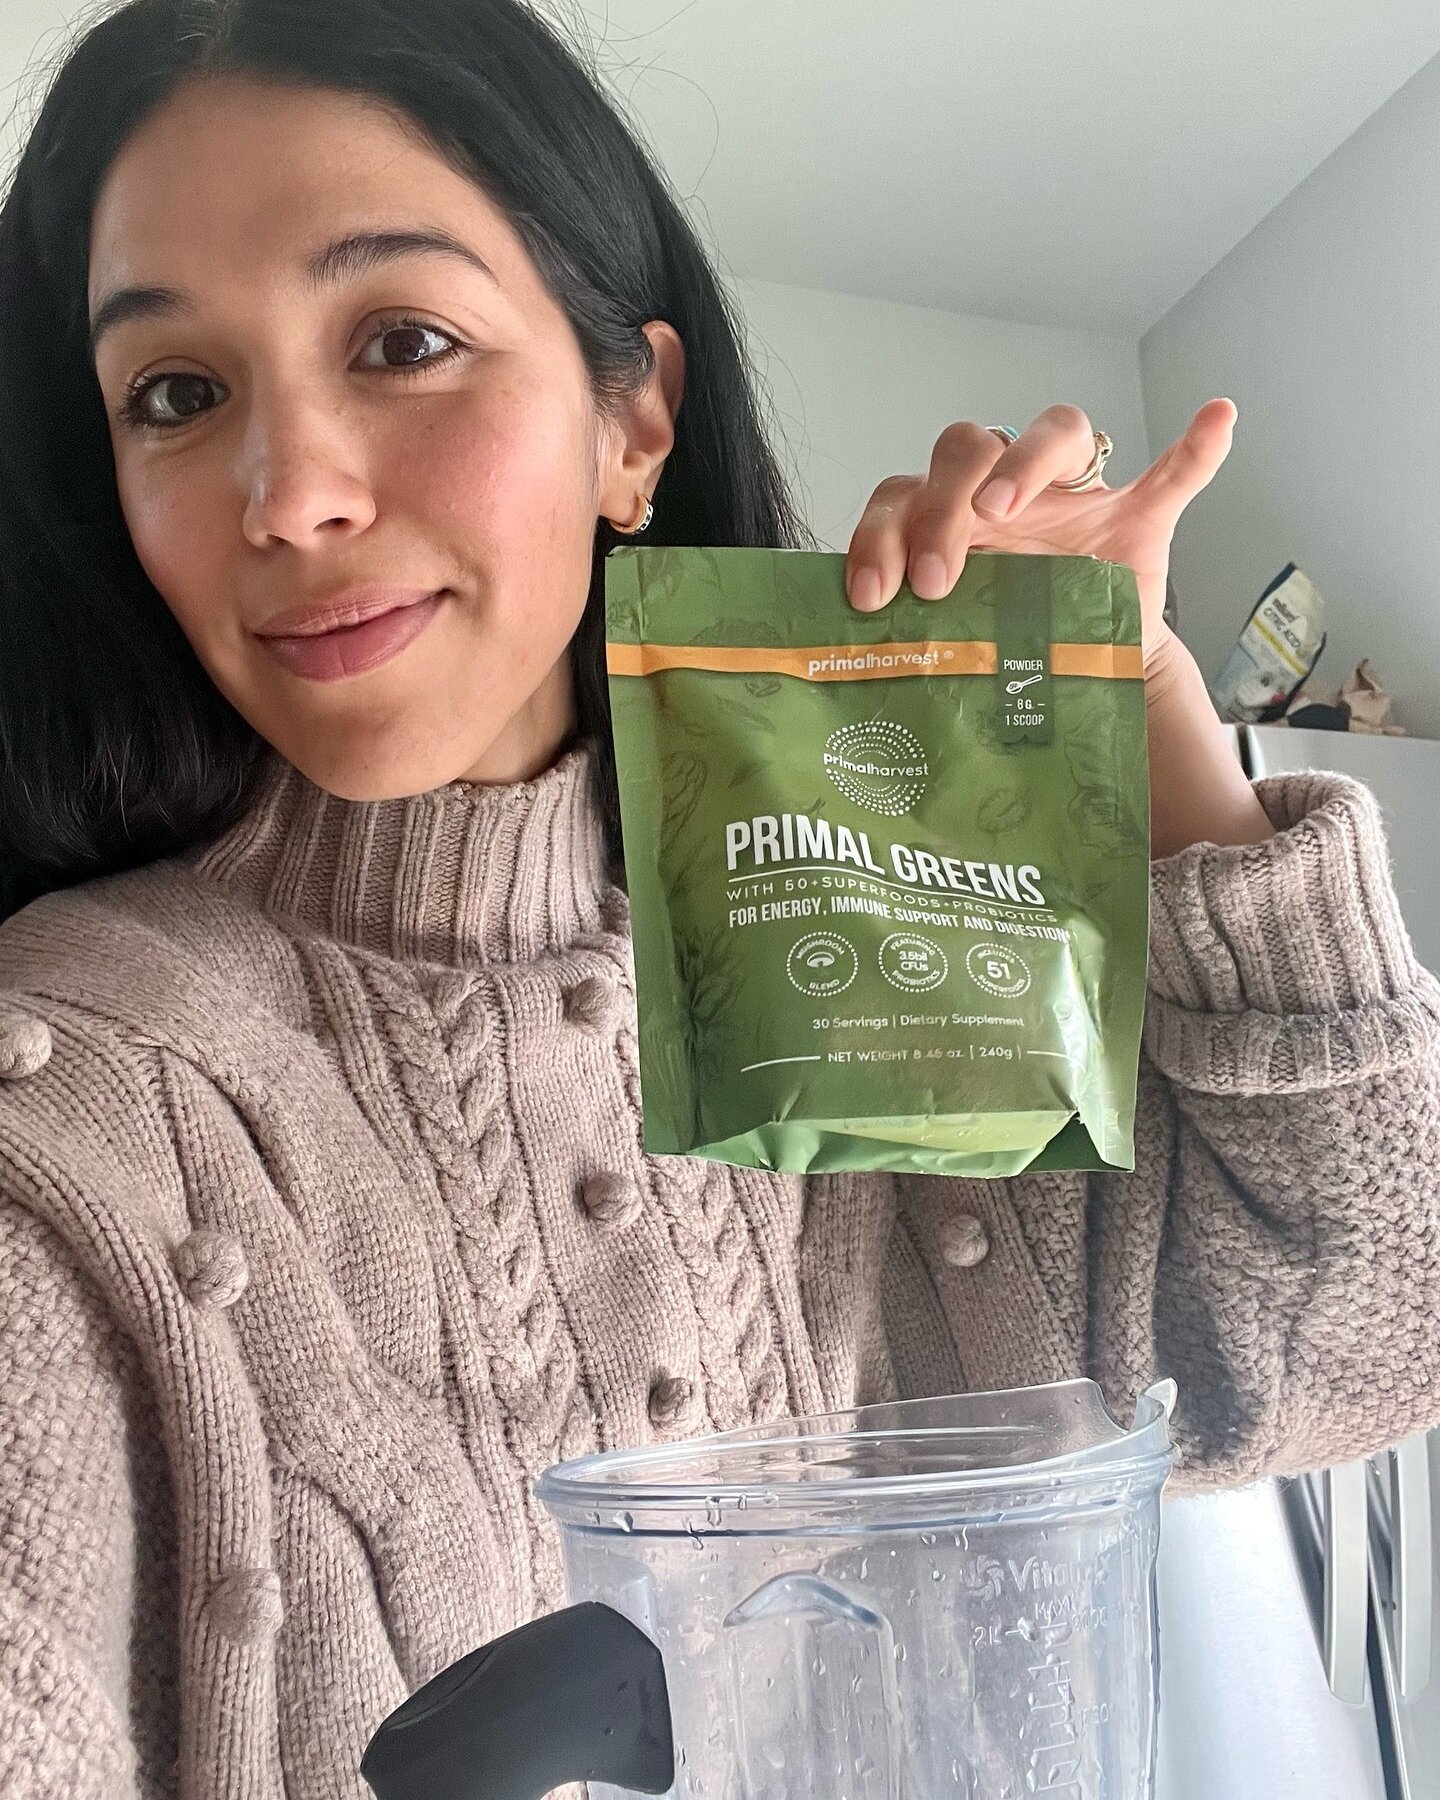 Y&rsquo;all, I&rsquo;m a creature of habit and I use this @primalharvest product in my smoothie every single day! I love that it has a mushroom blend, probiotics, and 51 superfoods! Who knew there was that many superfoods? If interested, here&rsquo;s